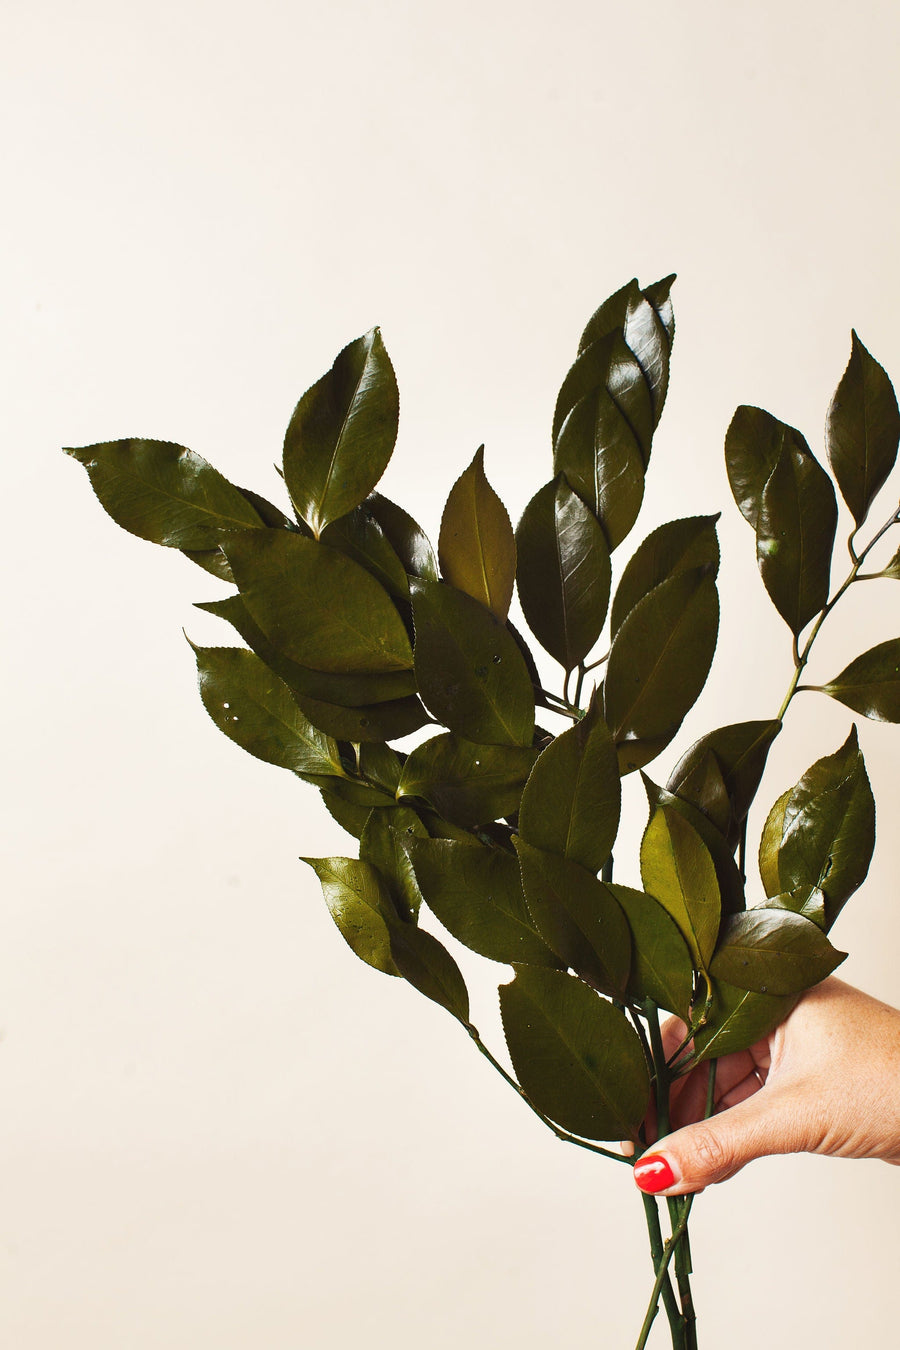 Idlewild Floral Co. Preserved Camelia Branches